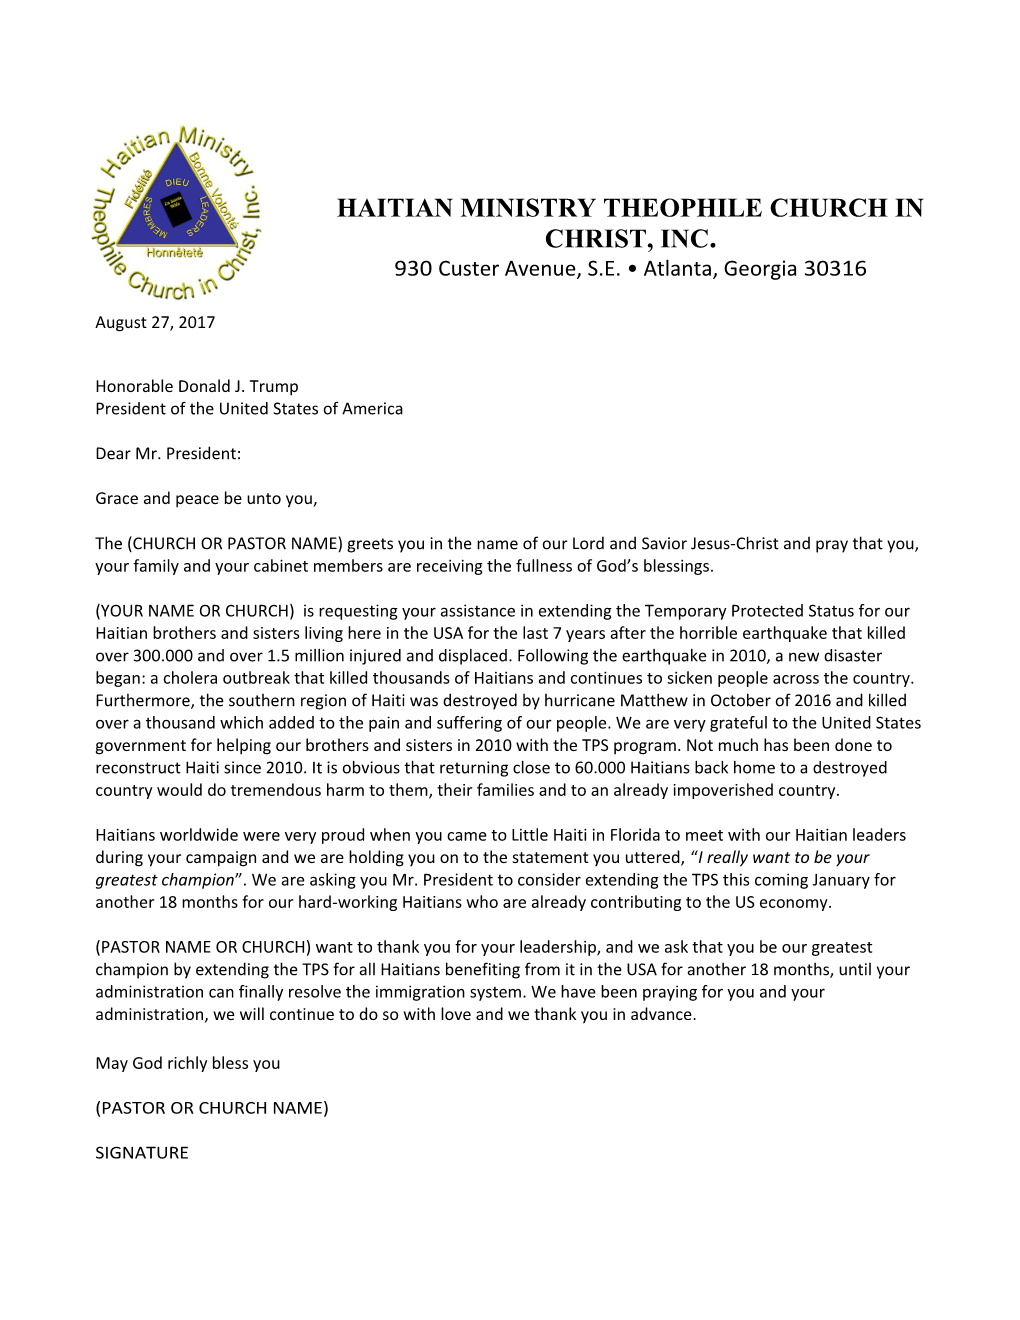 Haitian Ministry Theophile Church in Christ, Inc